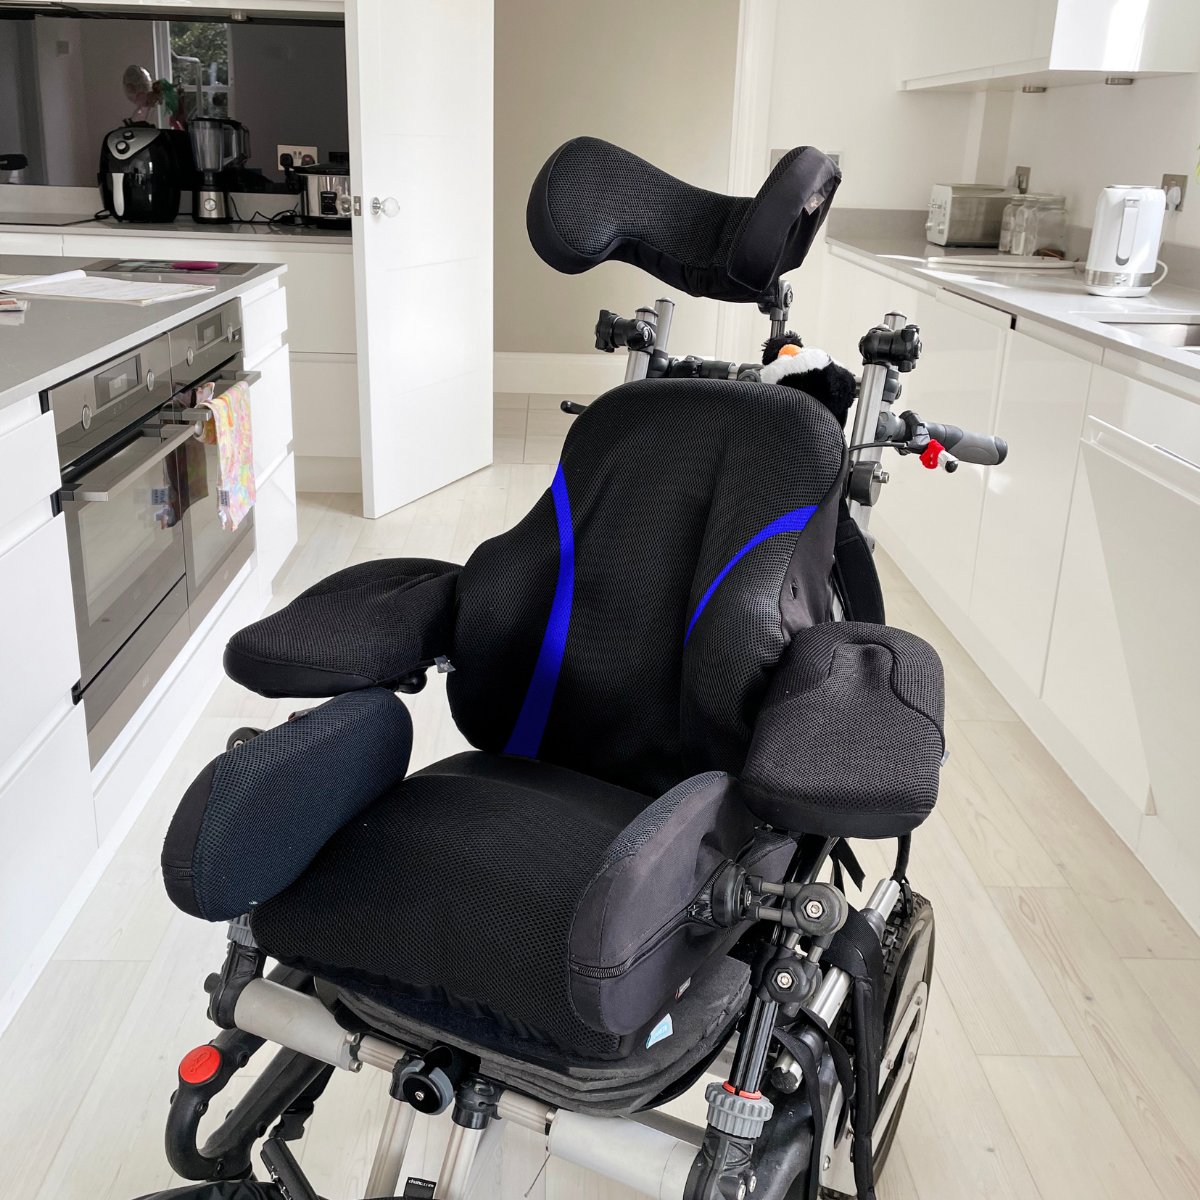 During the development and trialling phases of Aerseat - our Product Design team learned a lot about the seating challenges people face and when Aerseat can make the biggest impact. If you're unsure if Aerseat is suitable for you, your wheelchair or your seating needs pm us